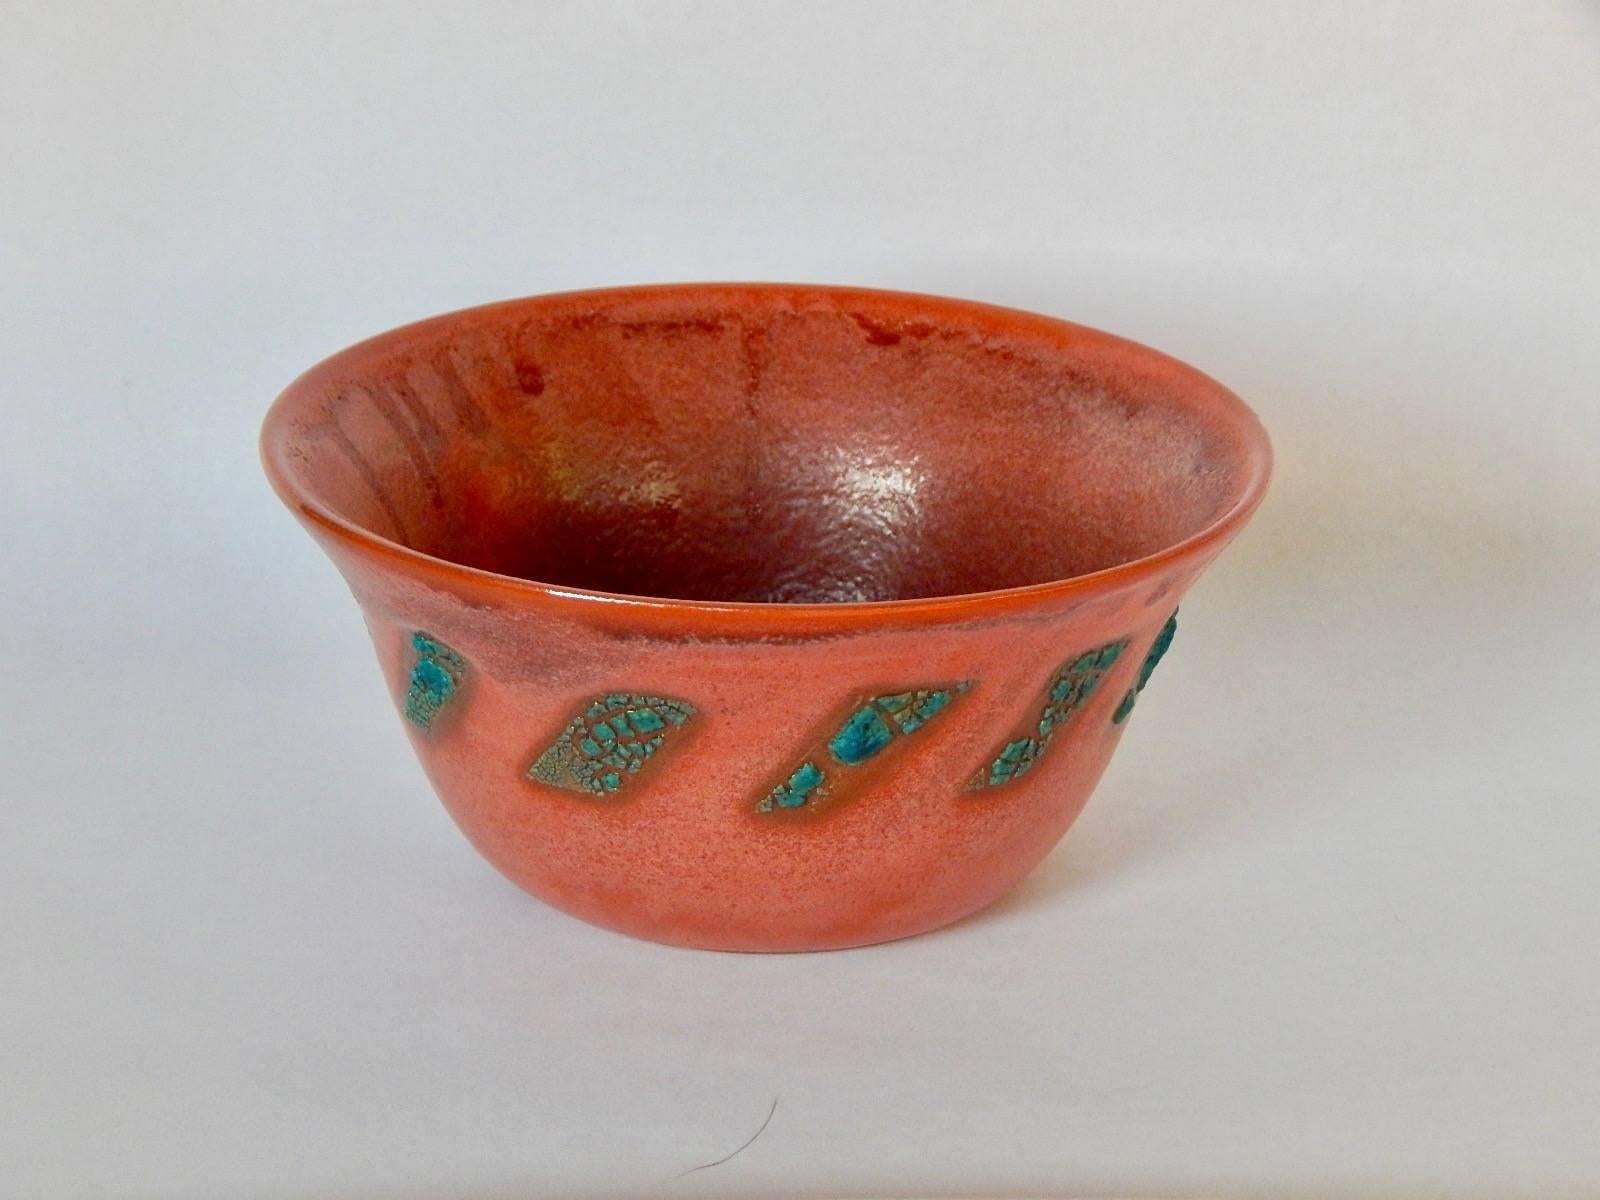 
Relicware wheel thrown earthenware bowl by Andrew Wilder # 77. In terra cotta with turquoise lichen glaze and terra cotta colored overglaze. Made by hand in Los Angeles, California, 2017.